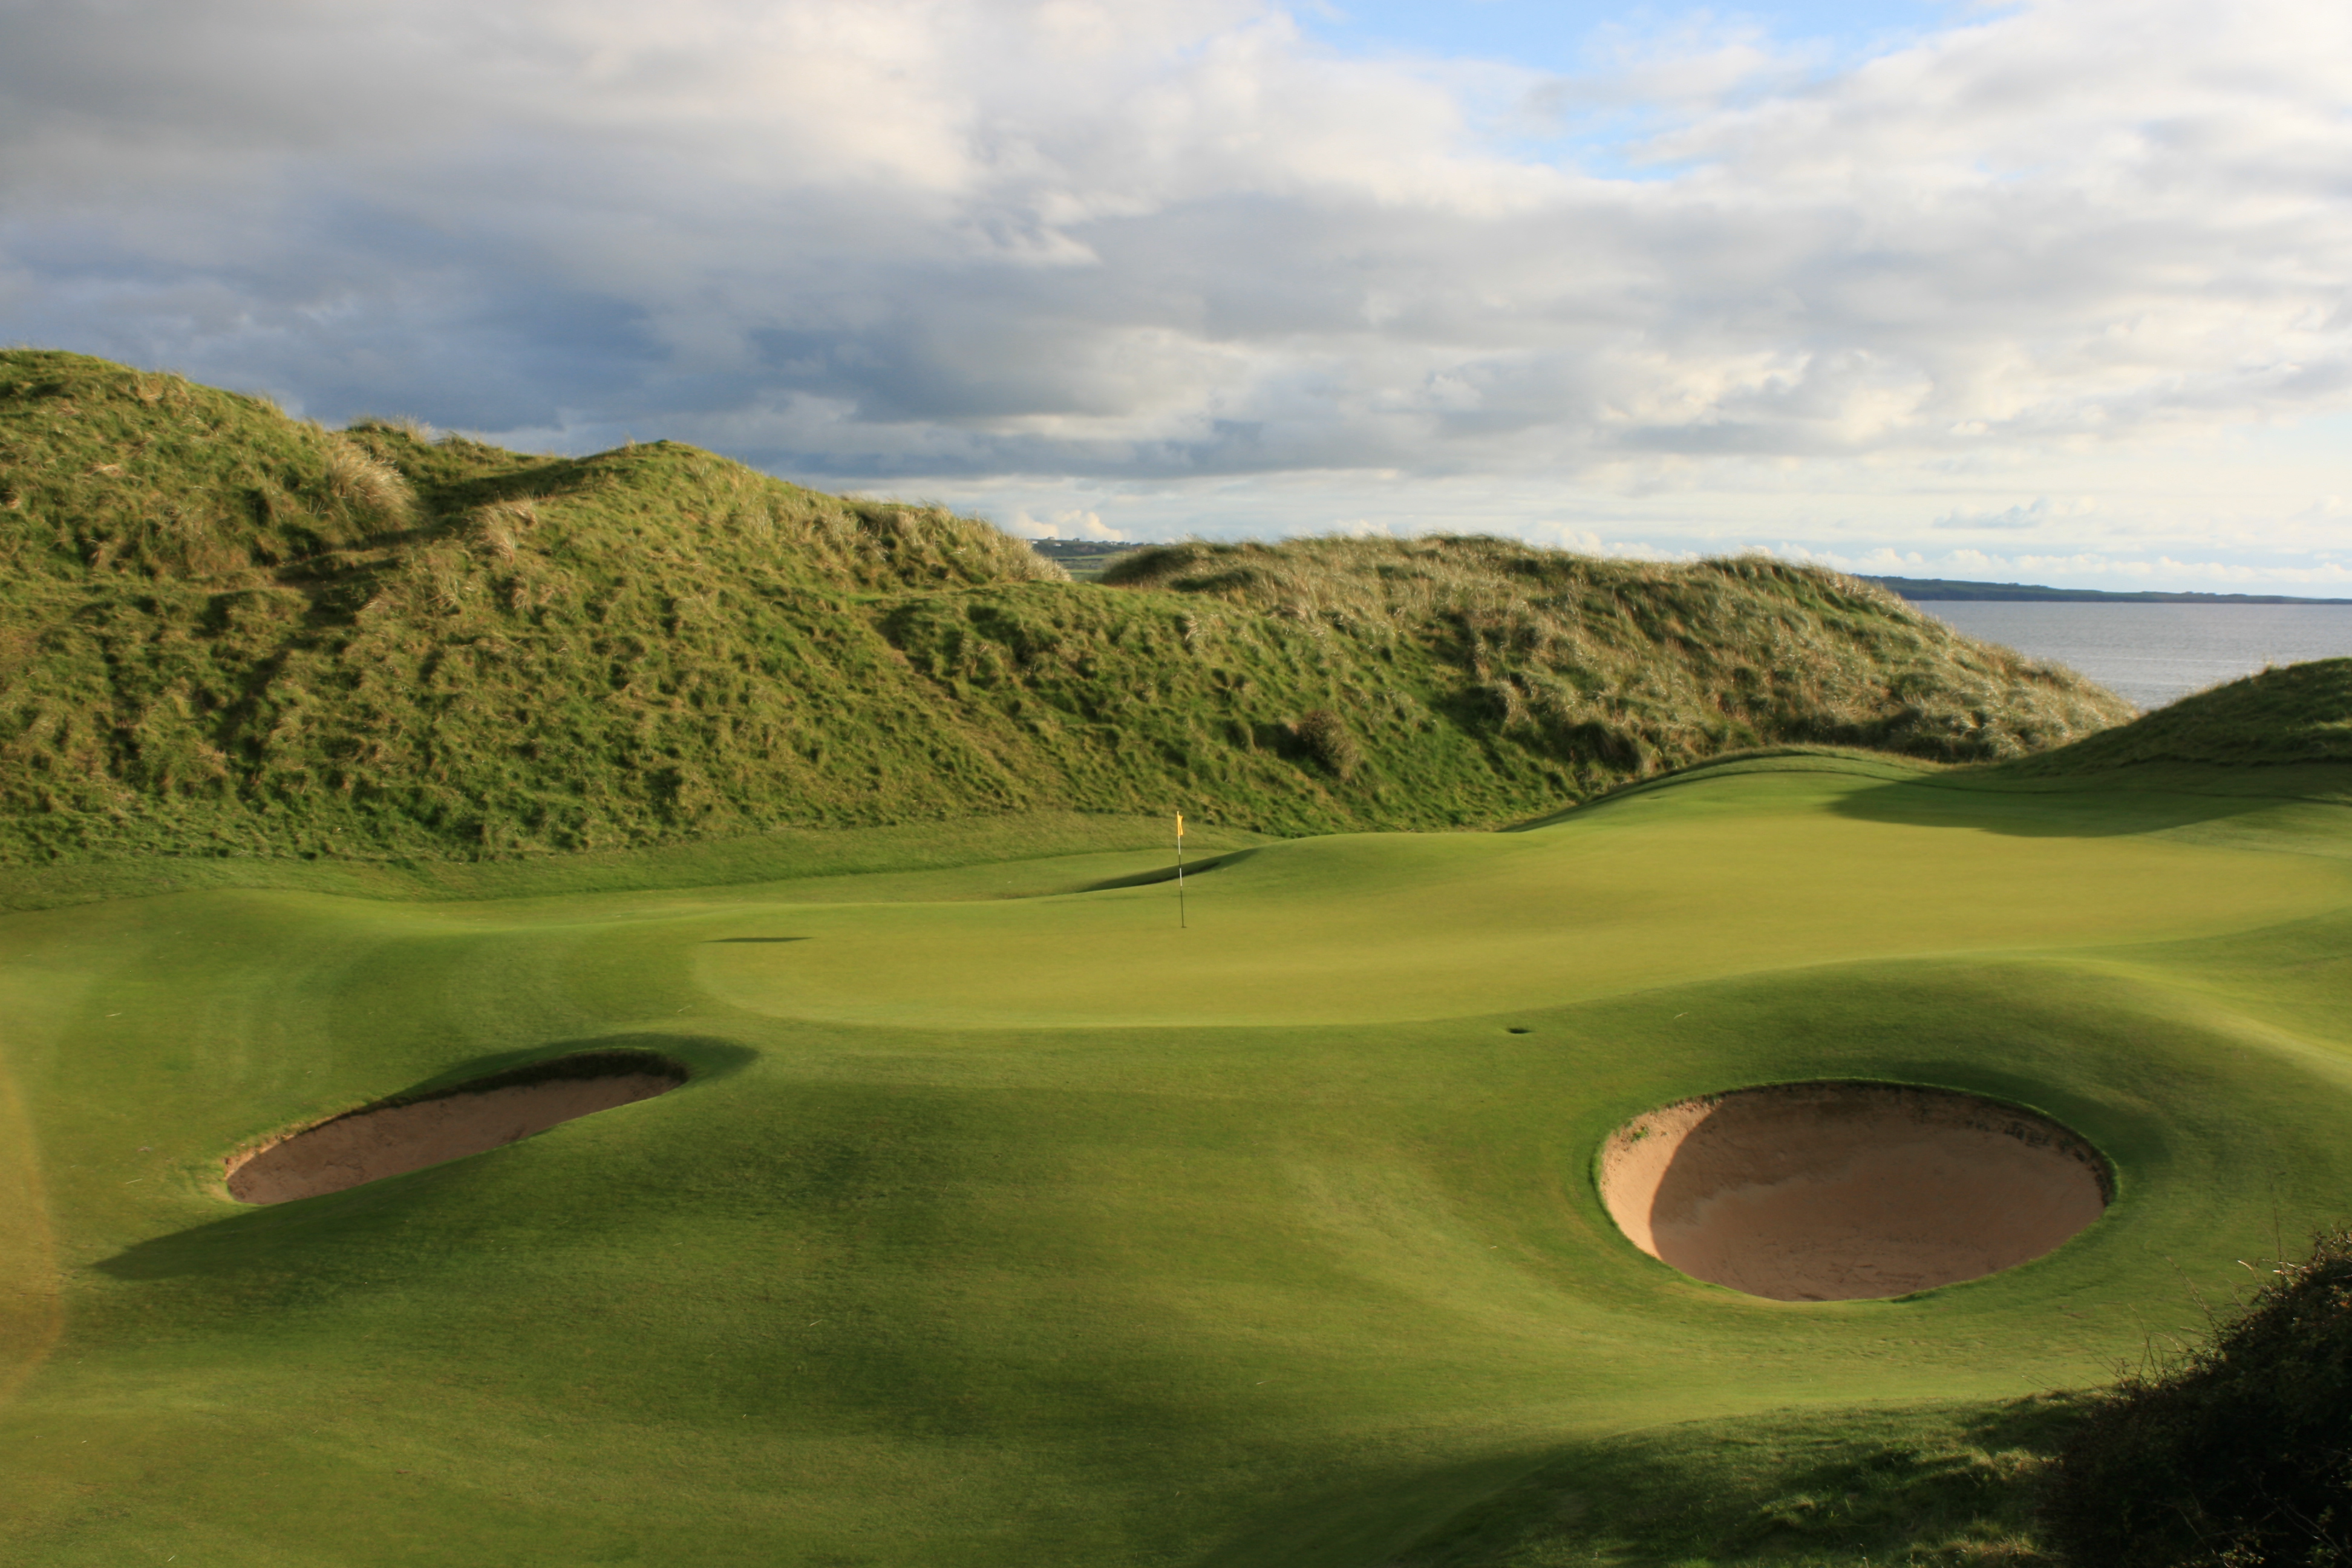 Ireland, day one: Lahinch Golf Club, historic and stunning